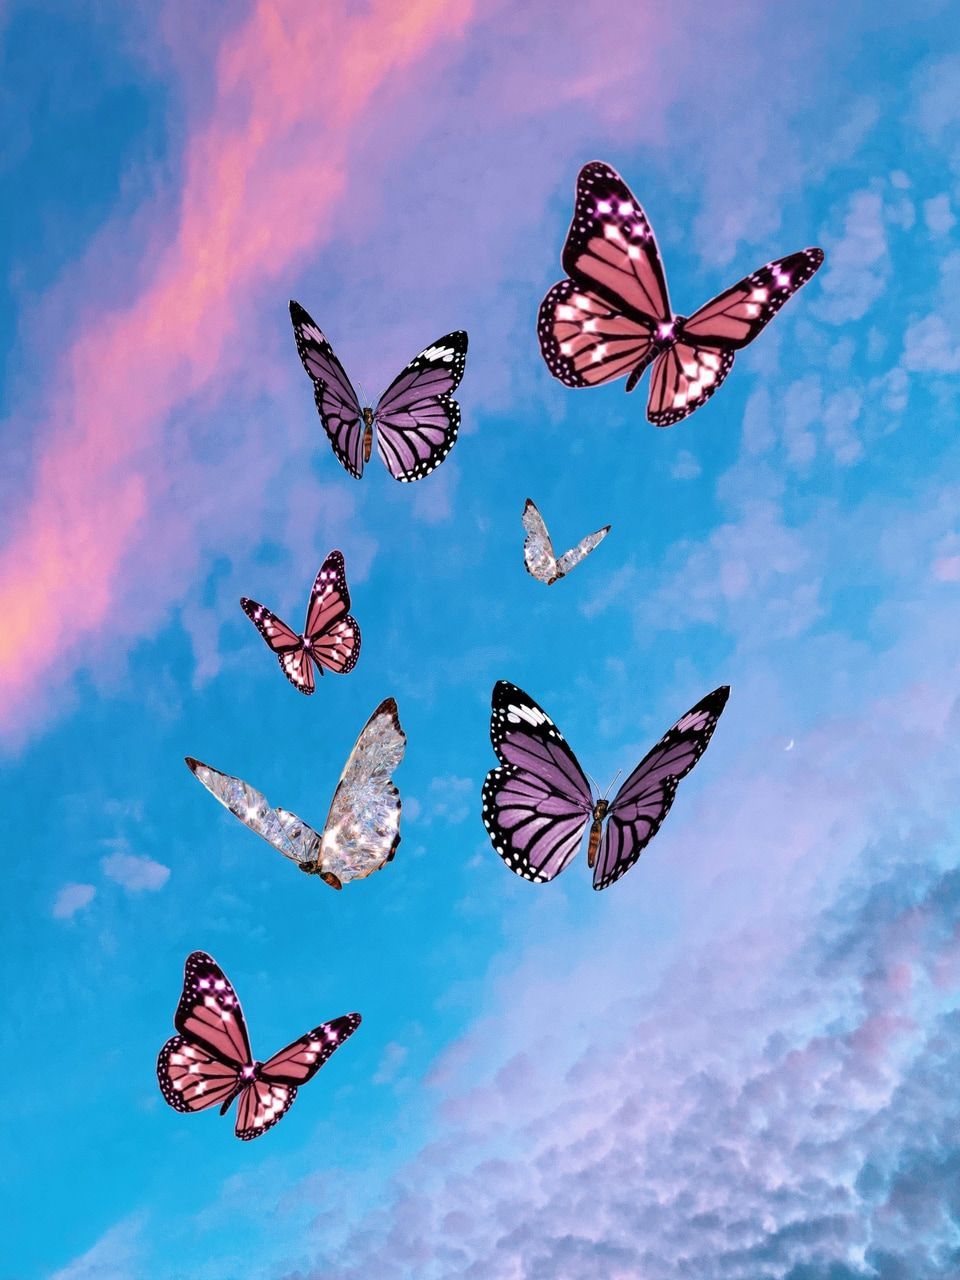 Butterfly At Sunset Wallpapers - Wallpaper Cave